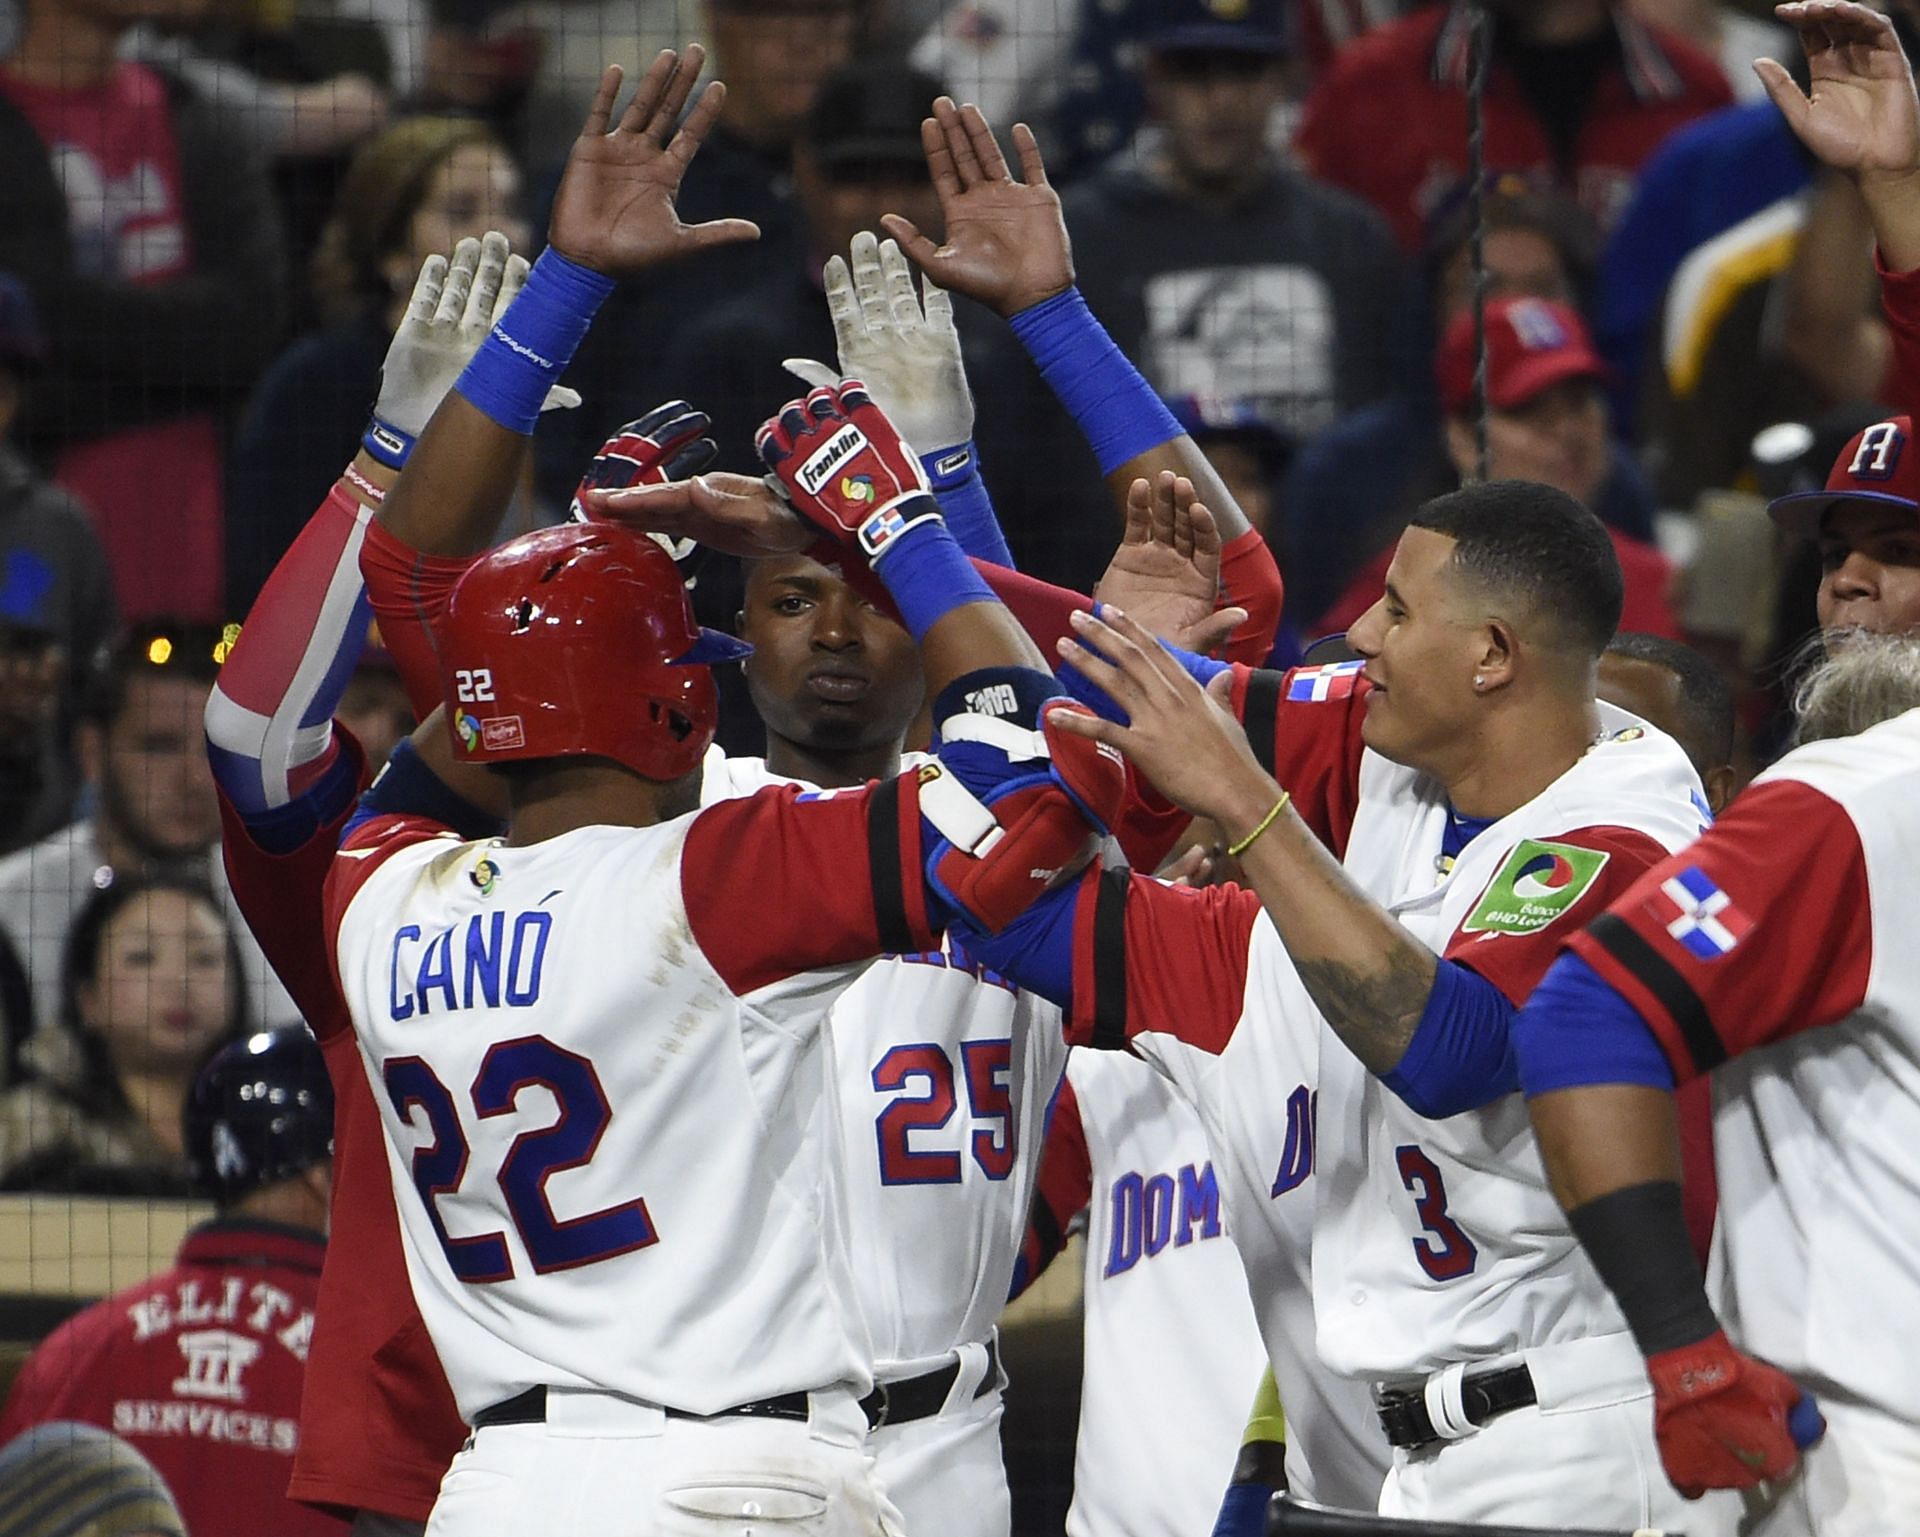 Peña commits to play for Dominican Republic in World Baseball Classic,  sources say